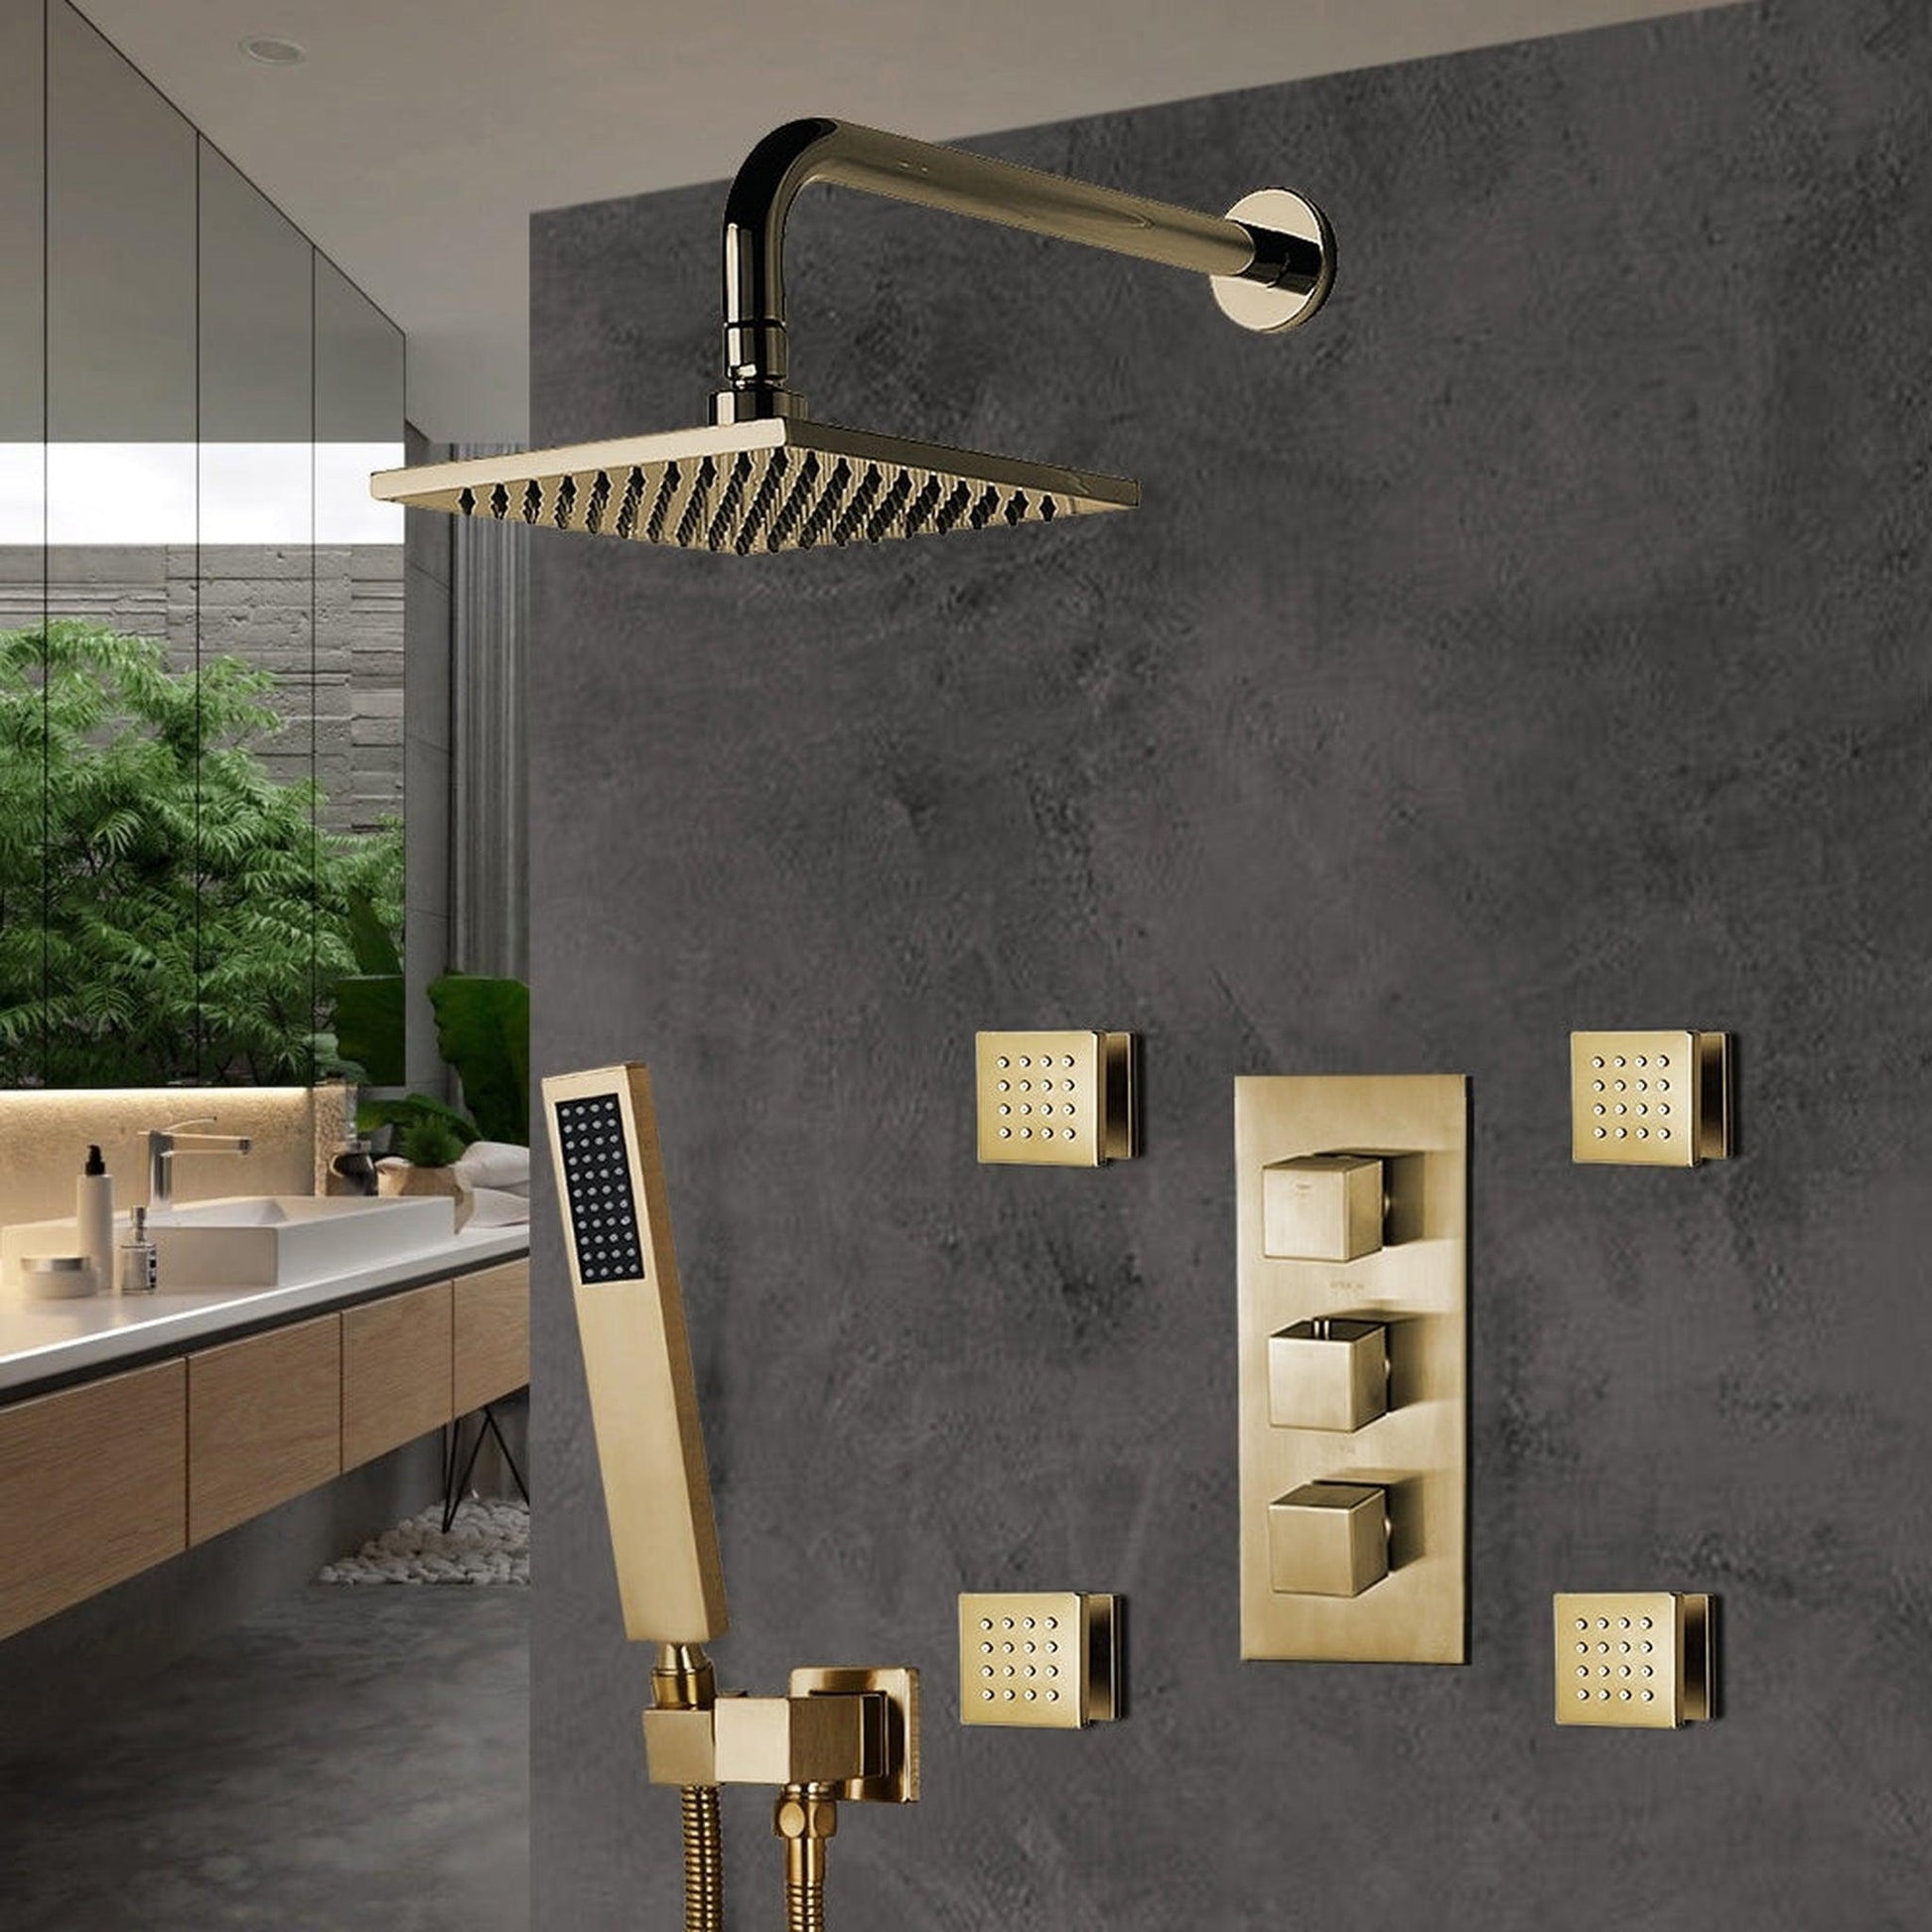 Fontana Brushed Gold Square Wall-Mounted Concealed 3-Way Valve Mixer Shower System With 4-Jet Body Sprays and Hand Shower